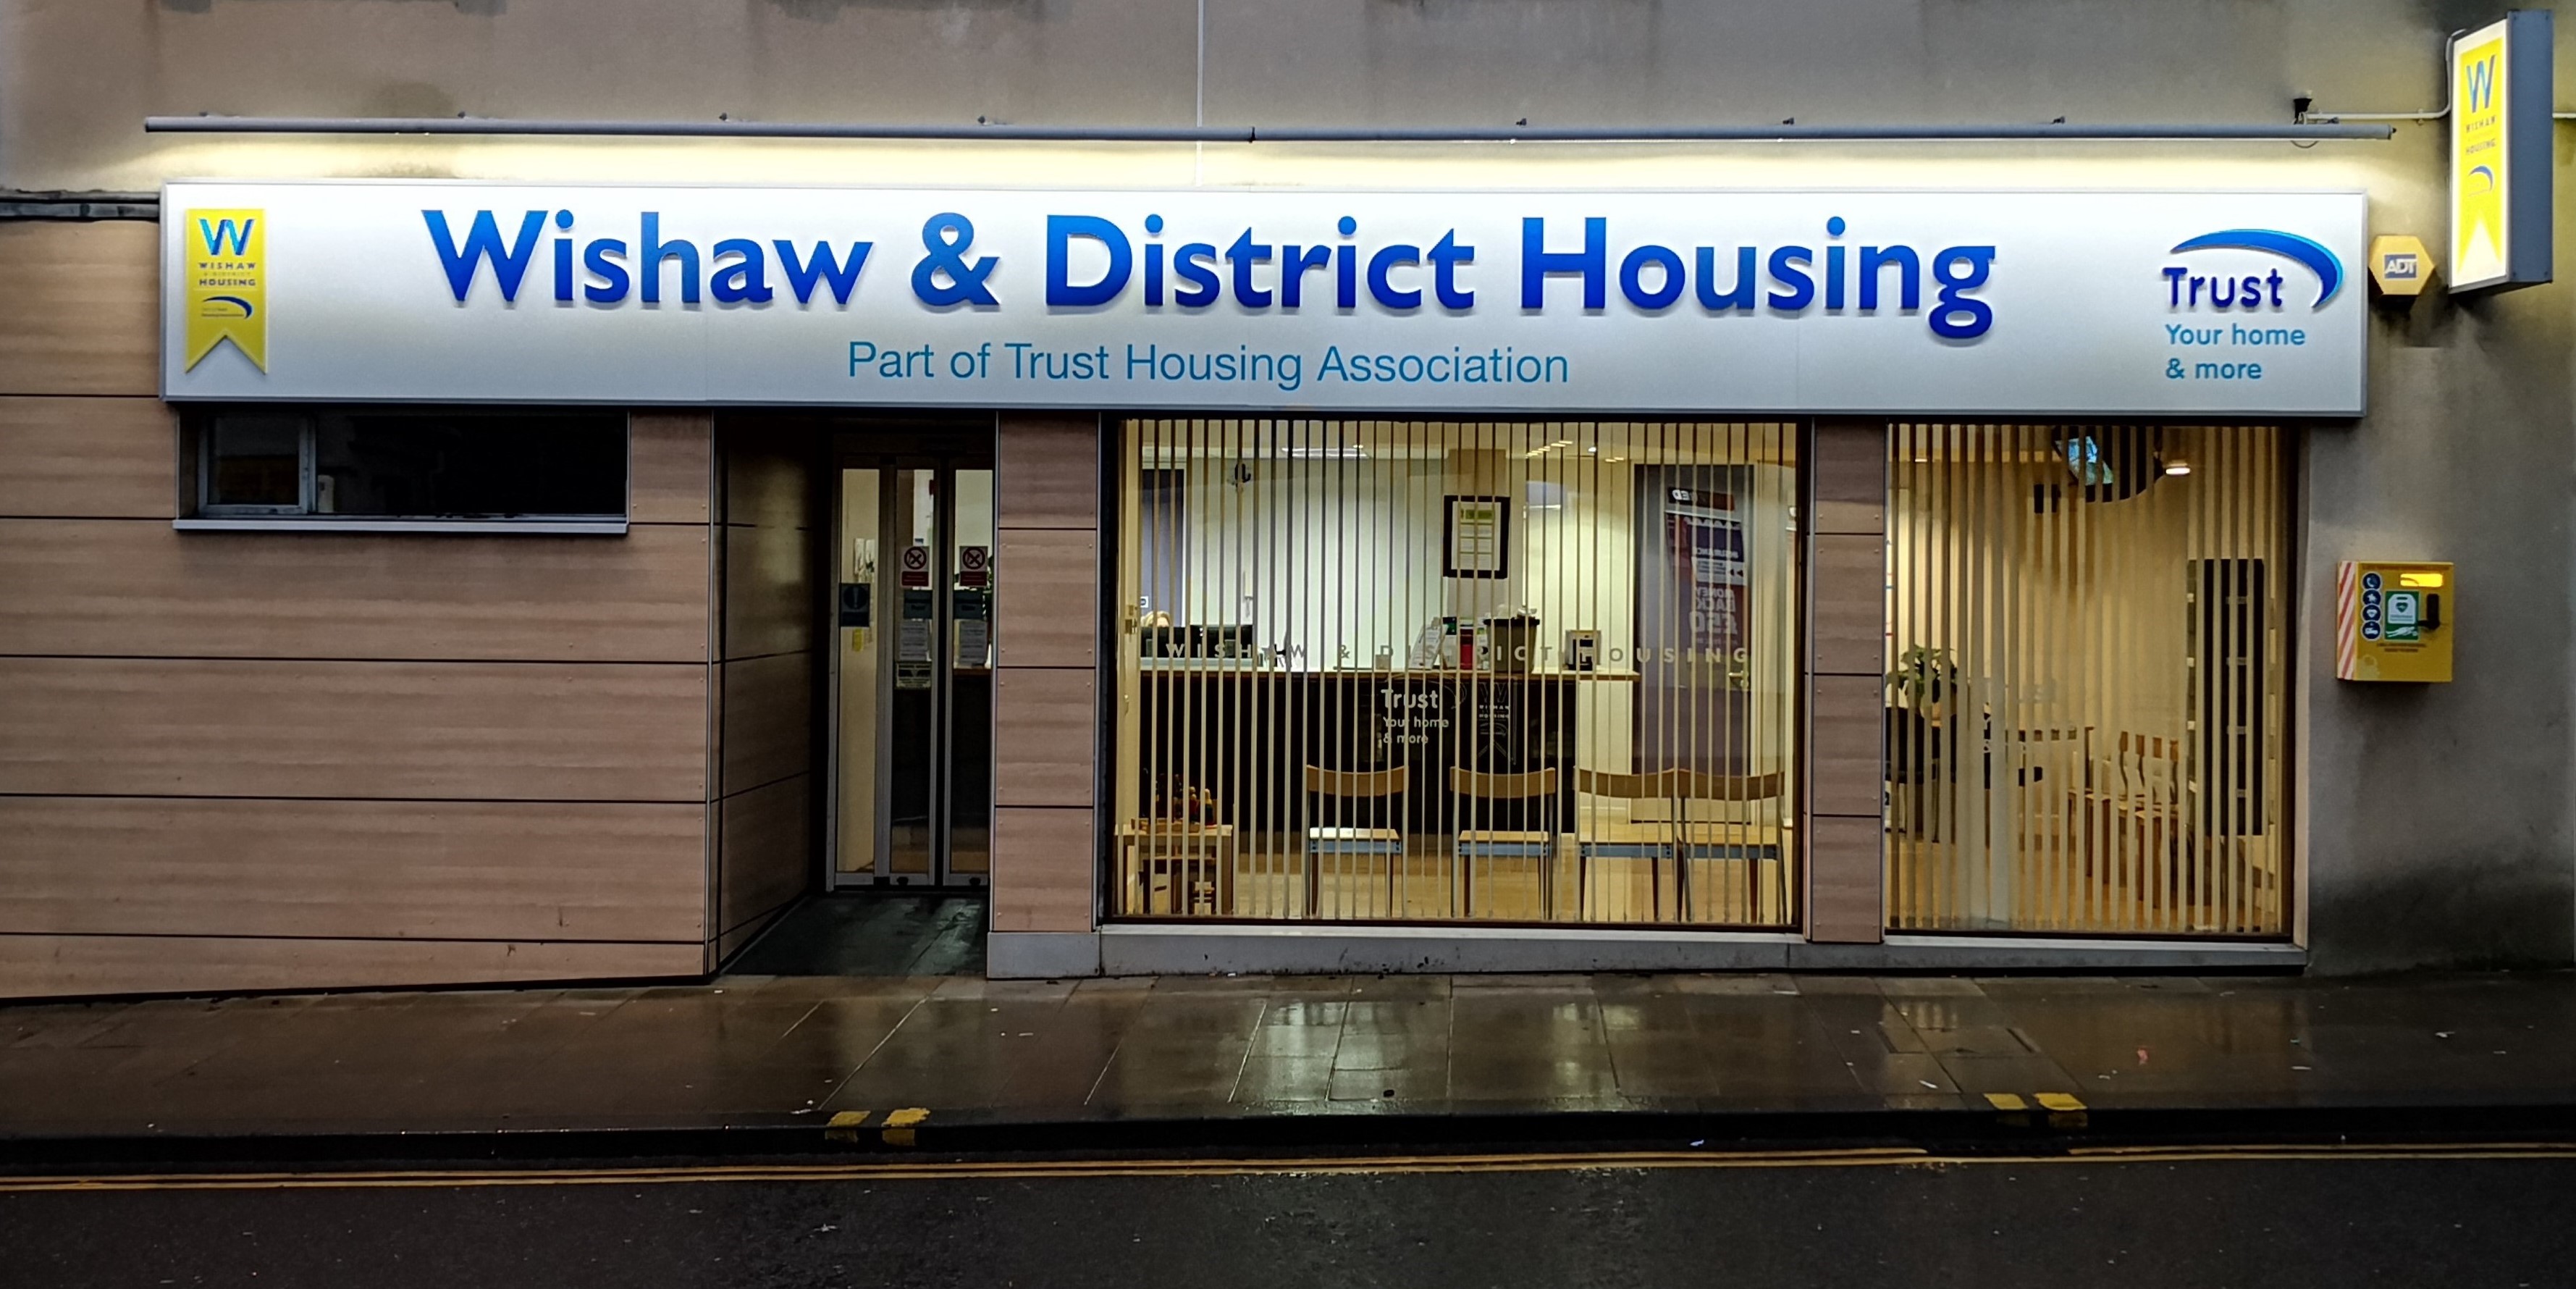 All change at Wishaw & District as transfer to Trust completes